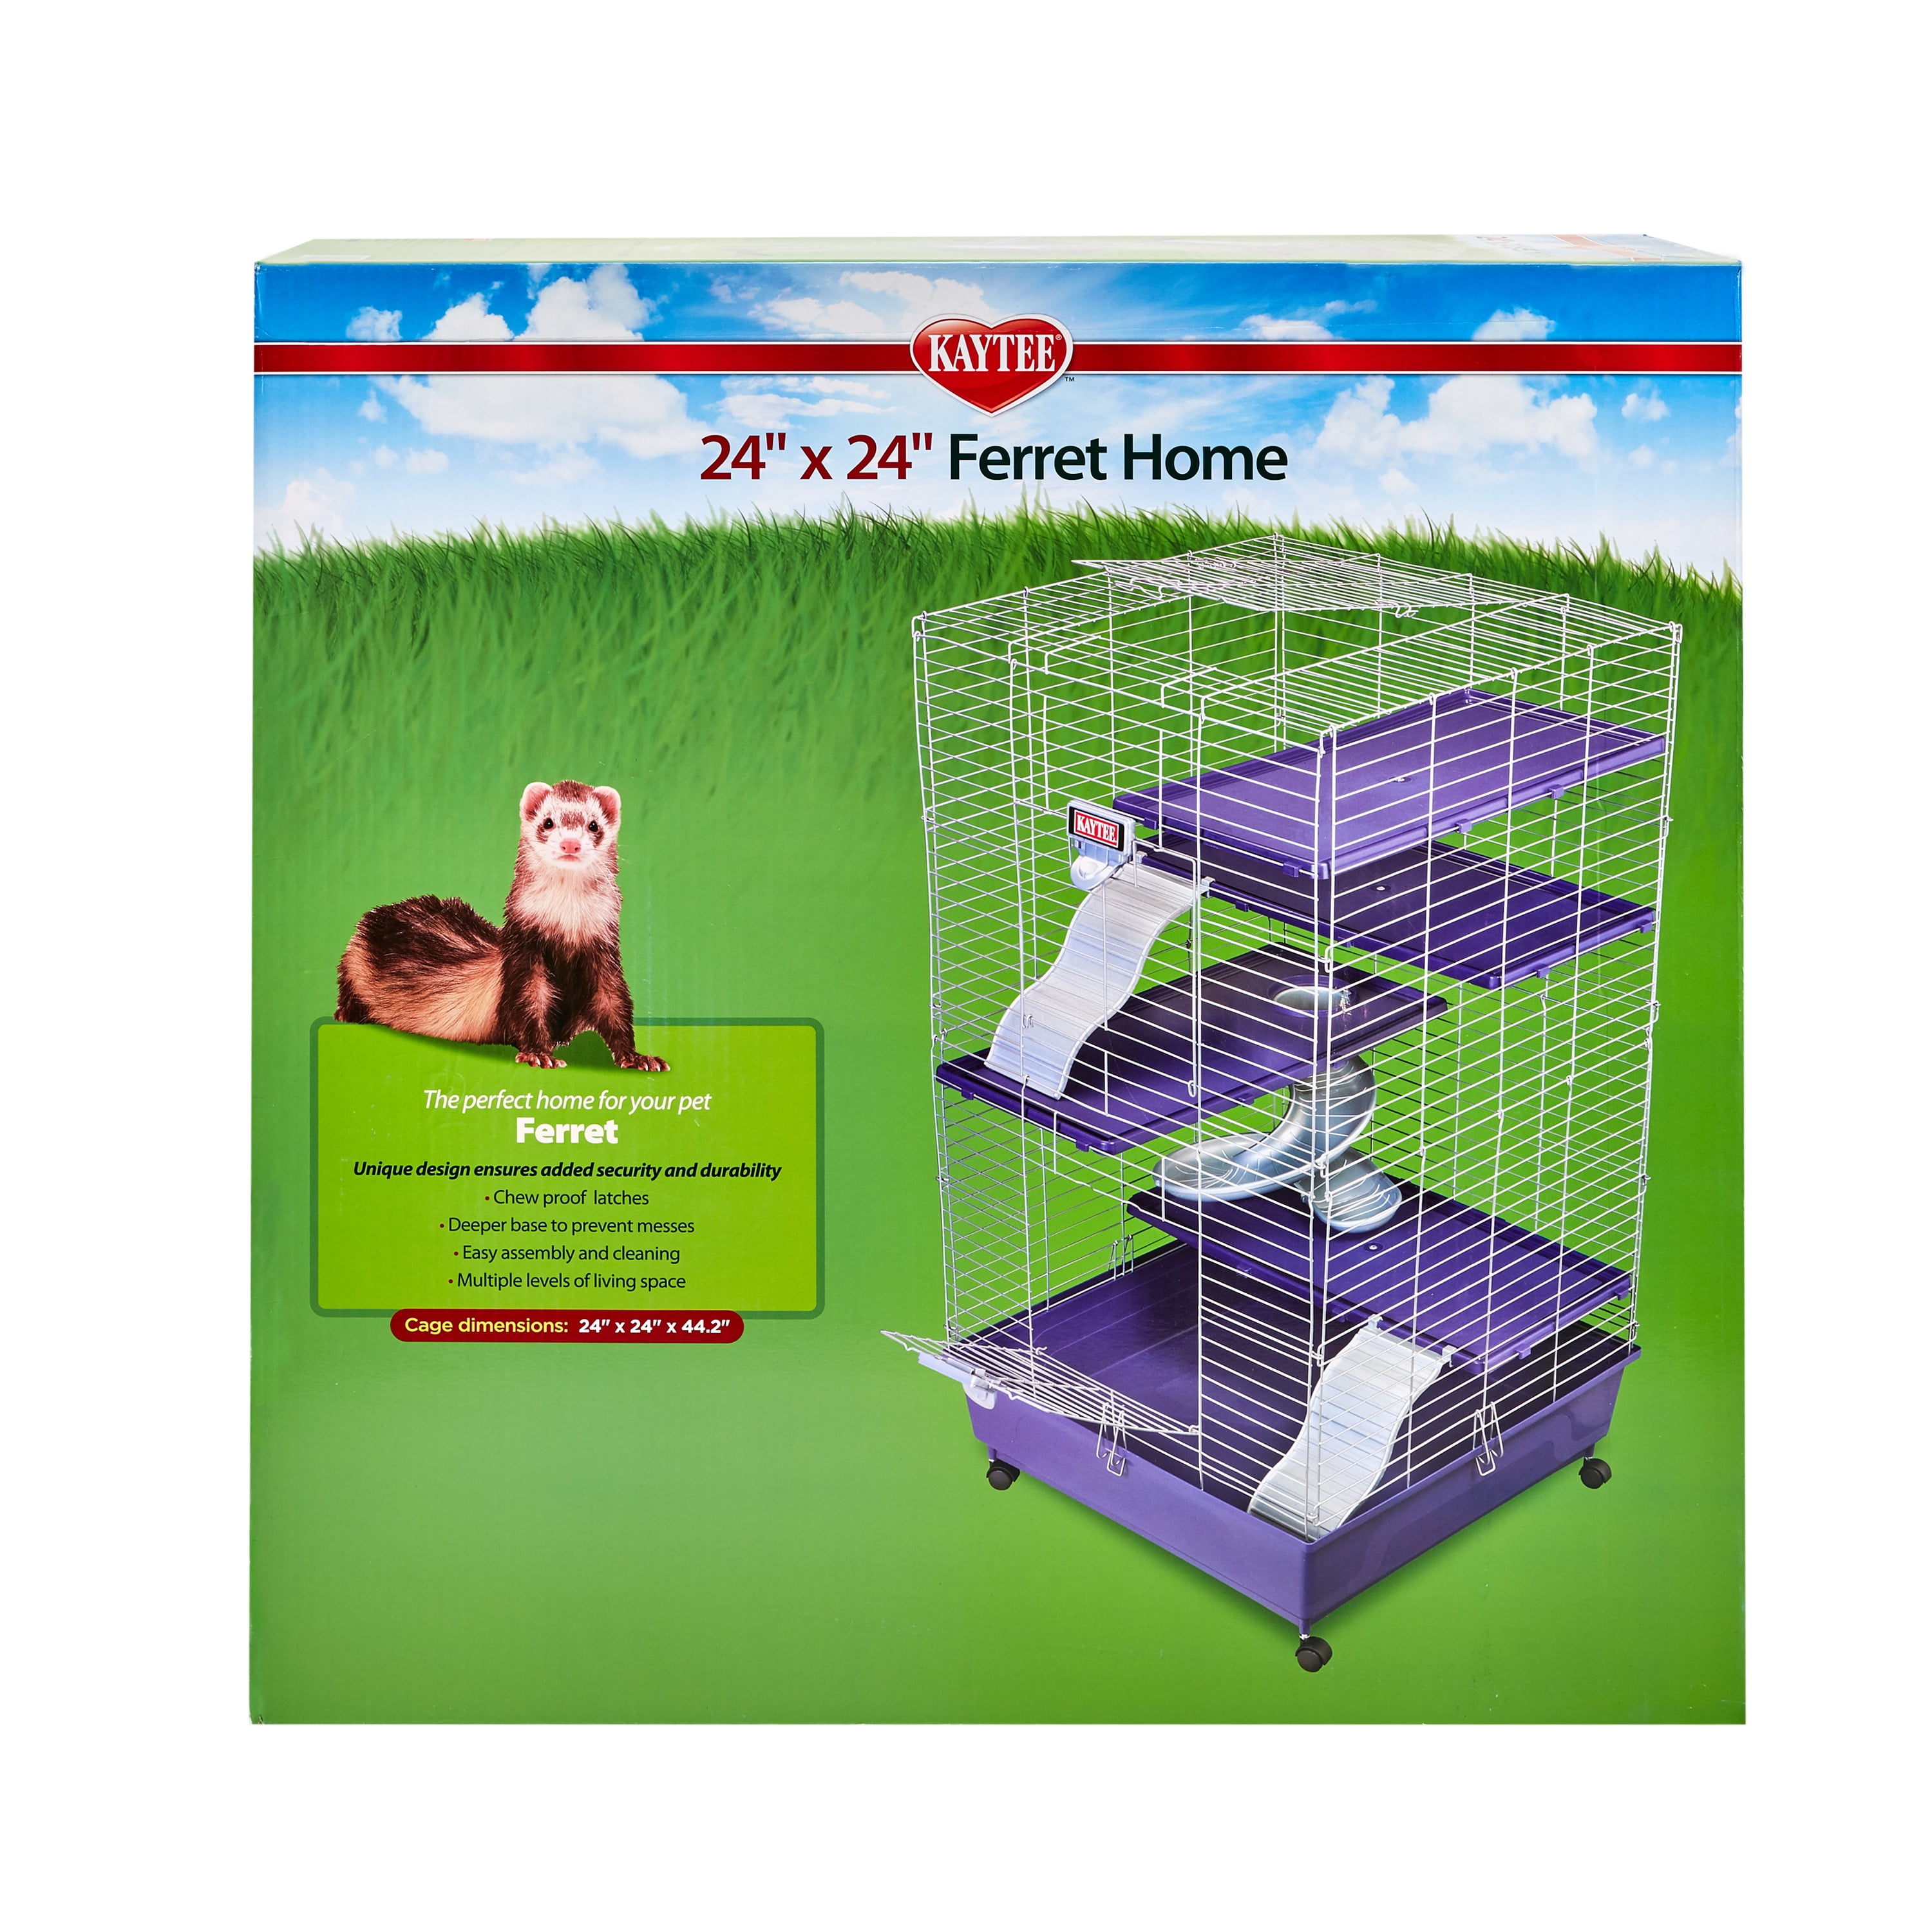 Homey Pet 36 or 30 Black Wire Cat Ferret Cage w//Tray and Casters Chinchilla